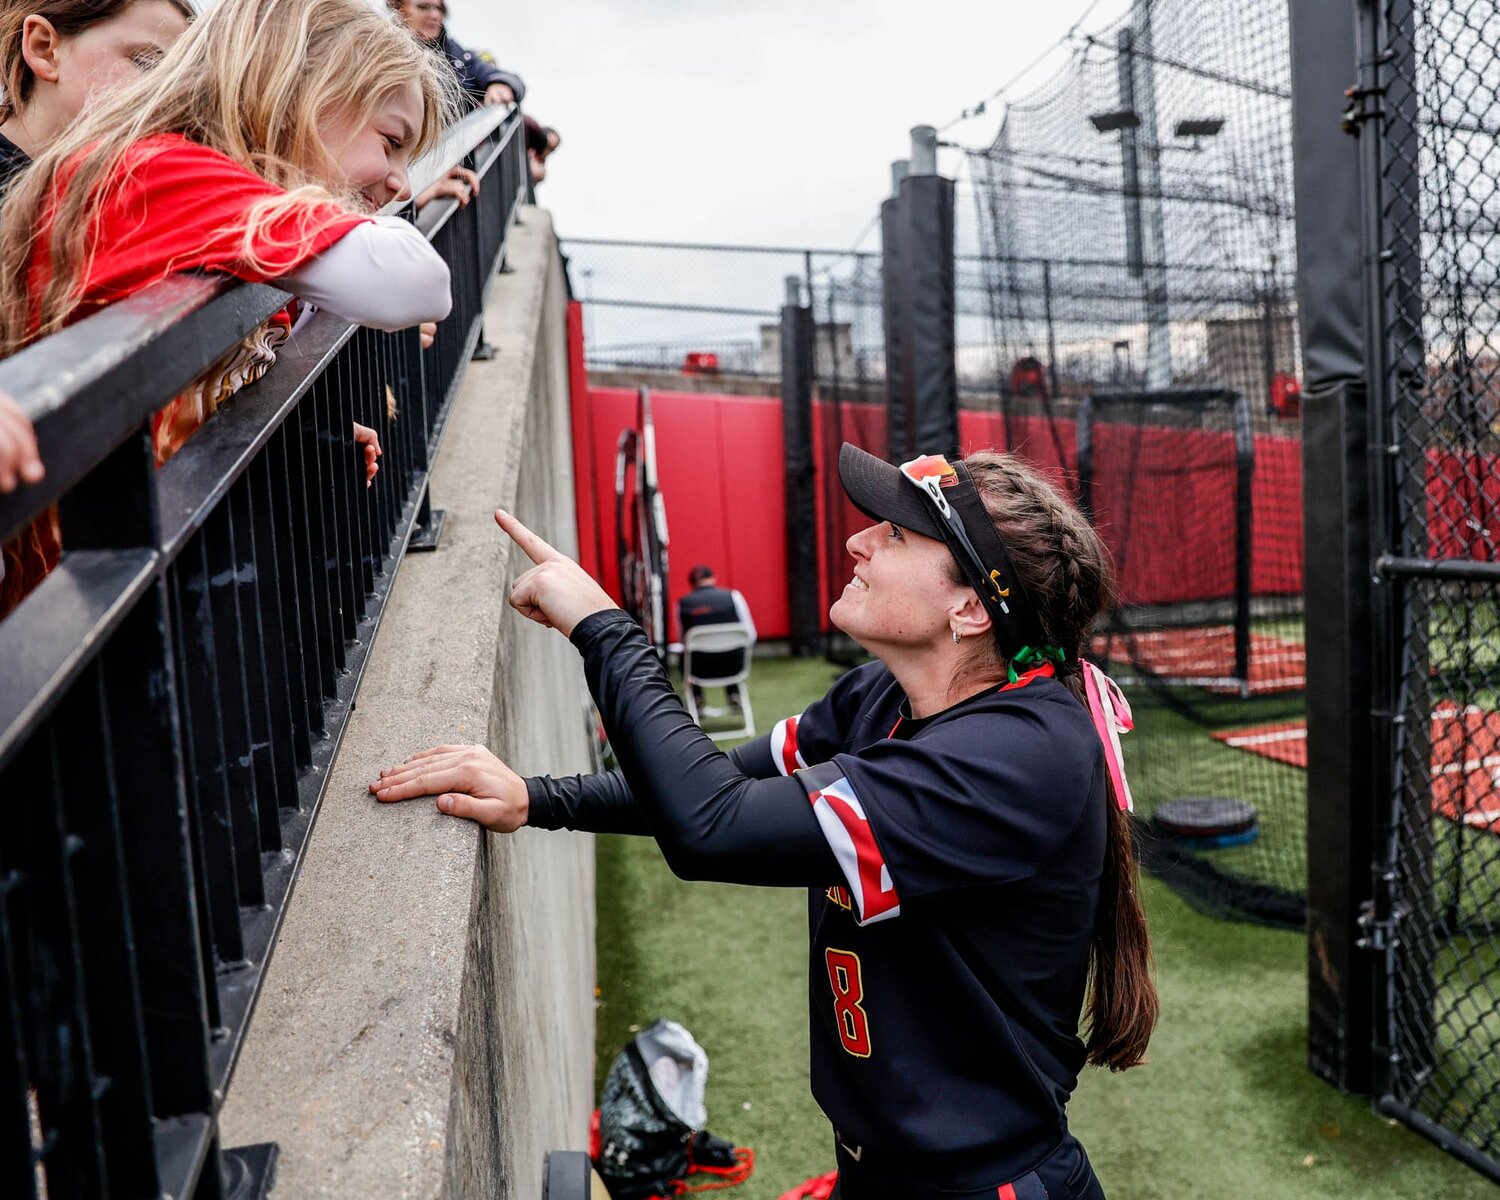 Campbell Kline enjoyed interacting with fans as a member of the University of Maryland softball team.